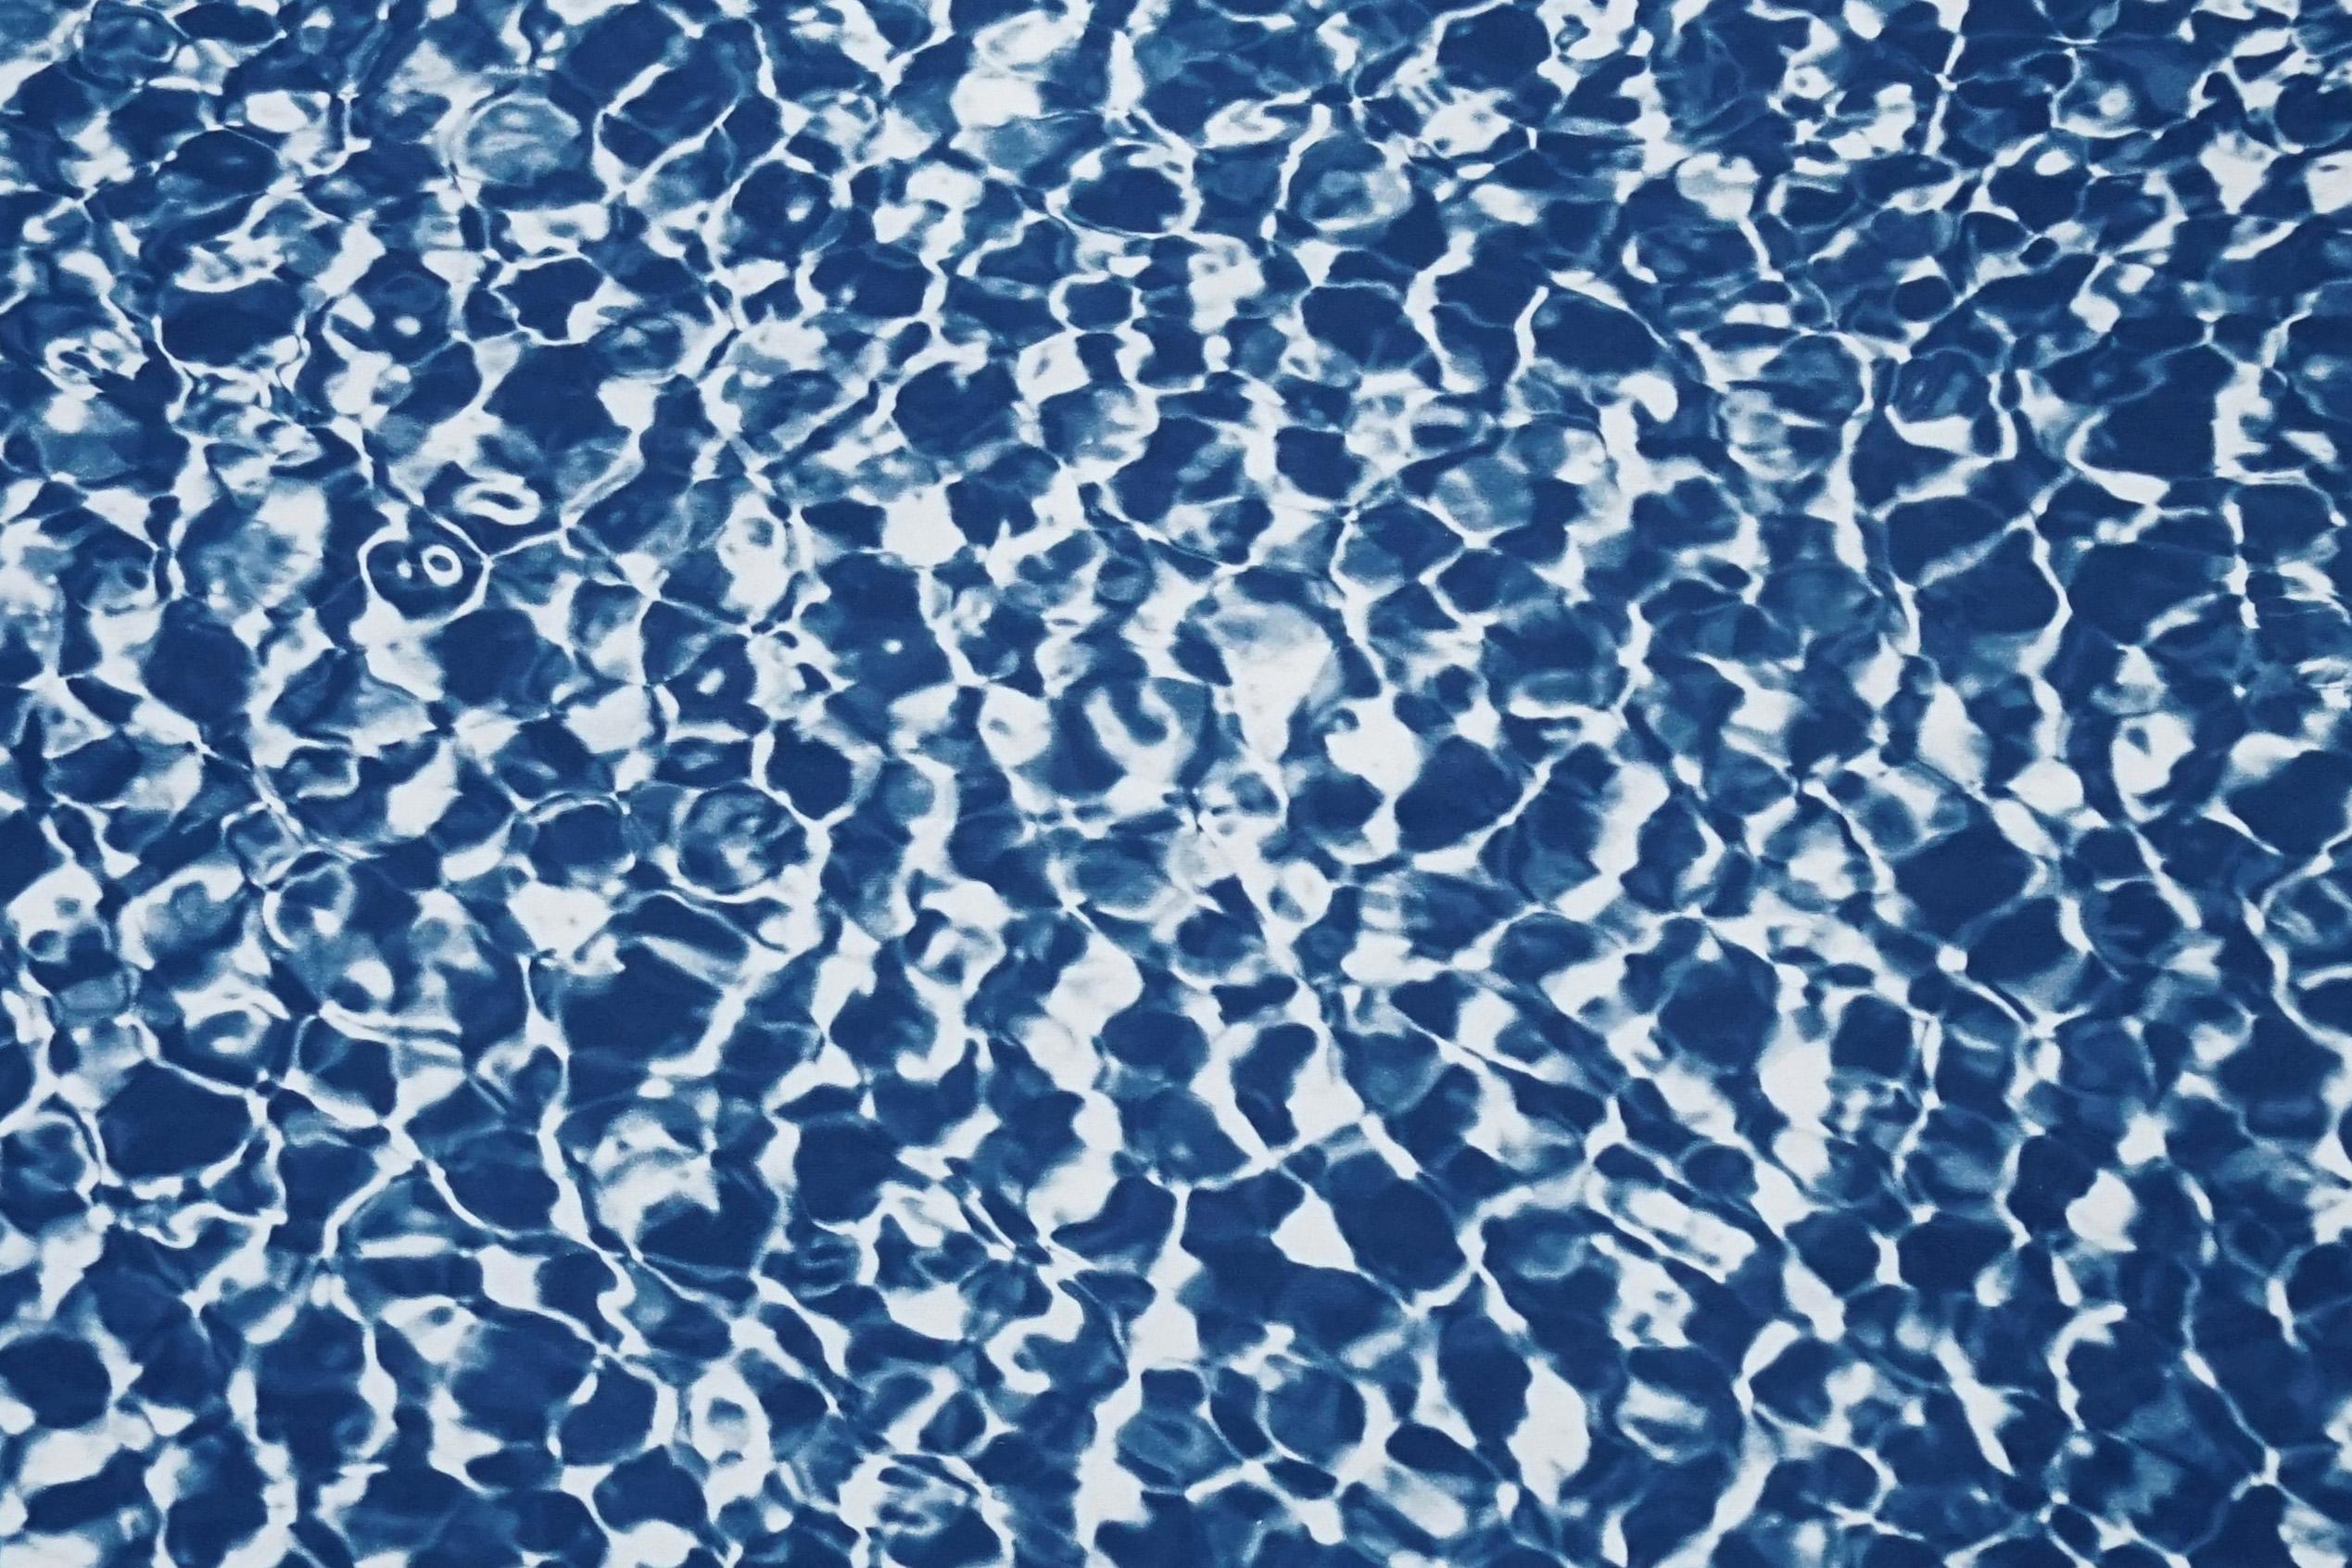 Infinity Pool Water Reflections, Blue & White Pattern, Handmade Cyanotype Print For Sale 3